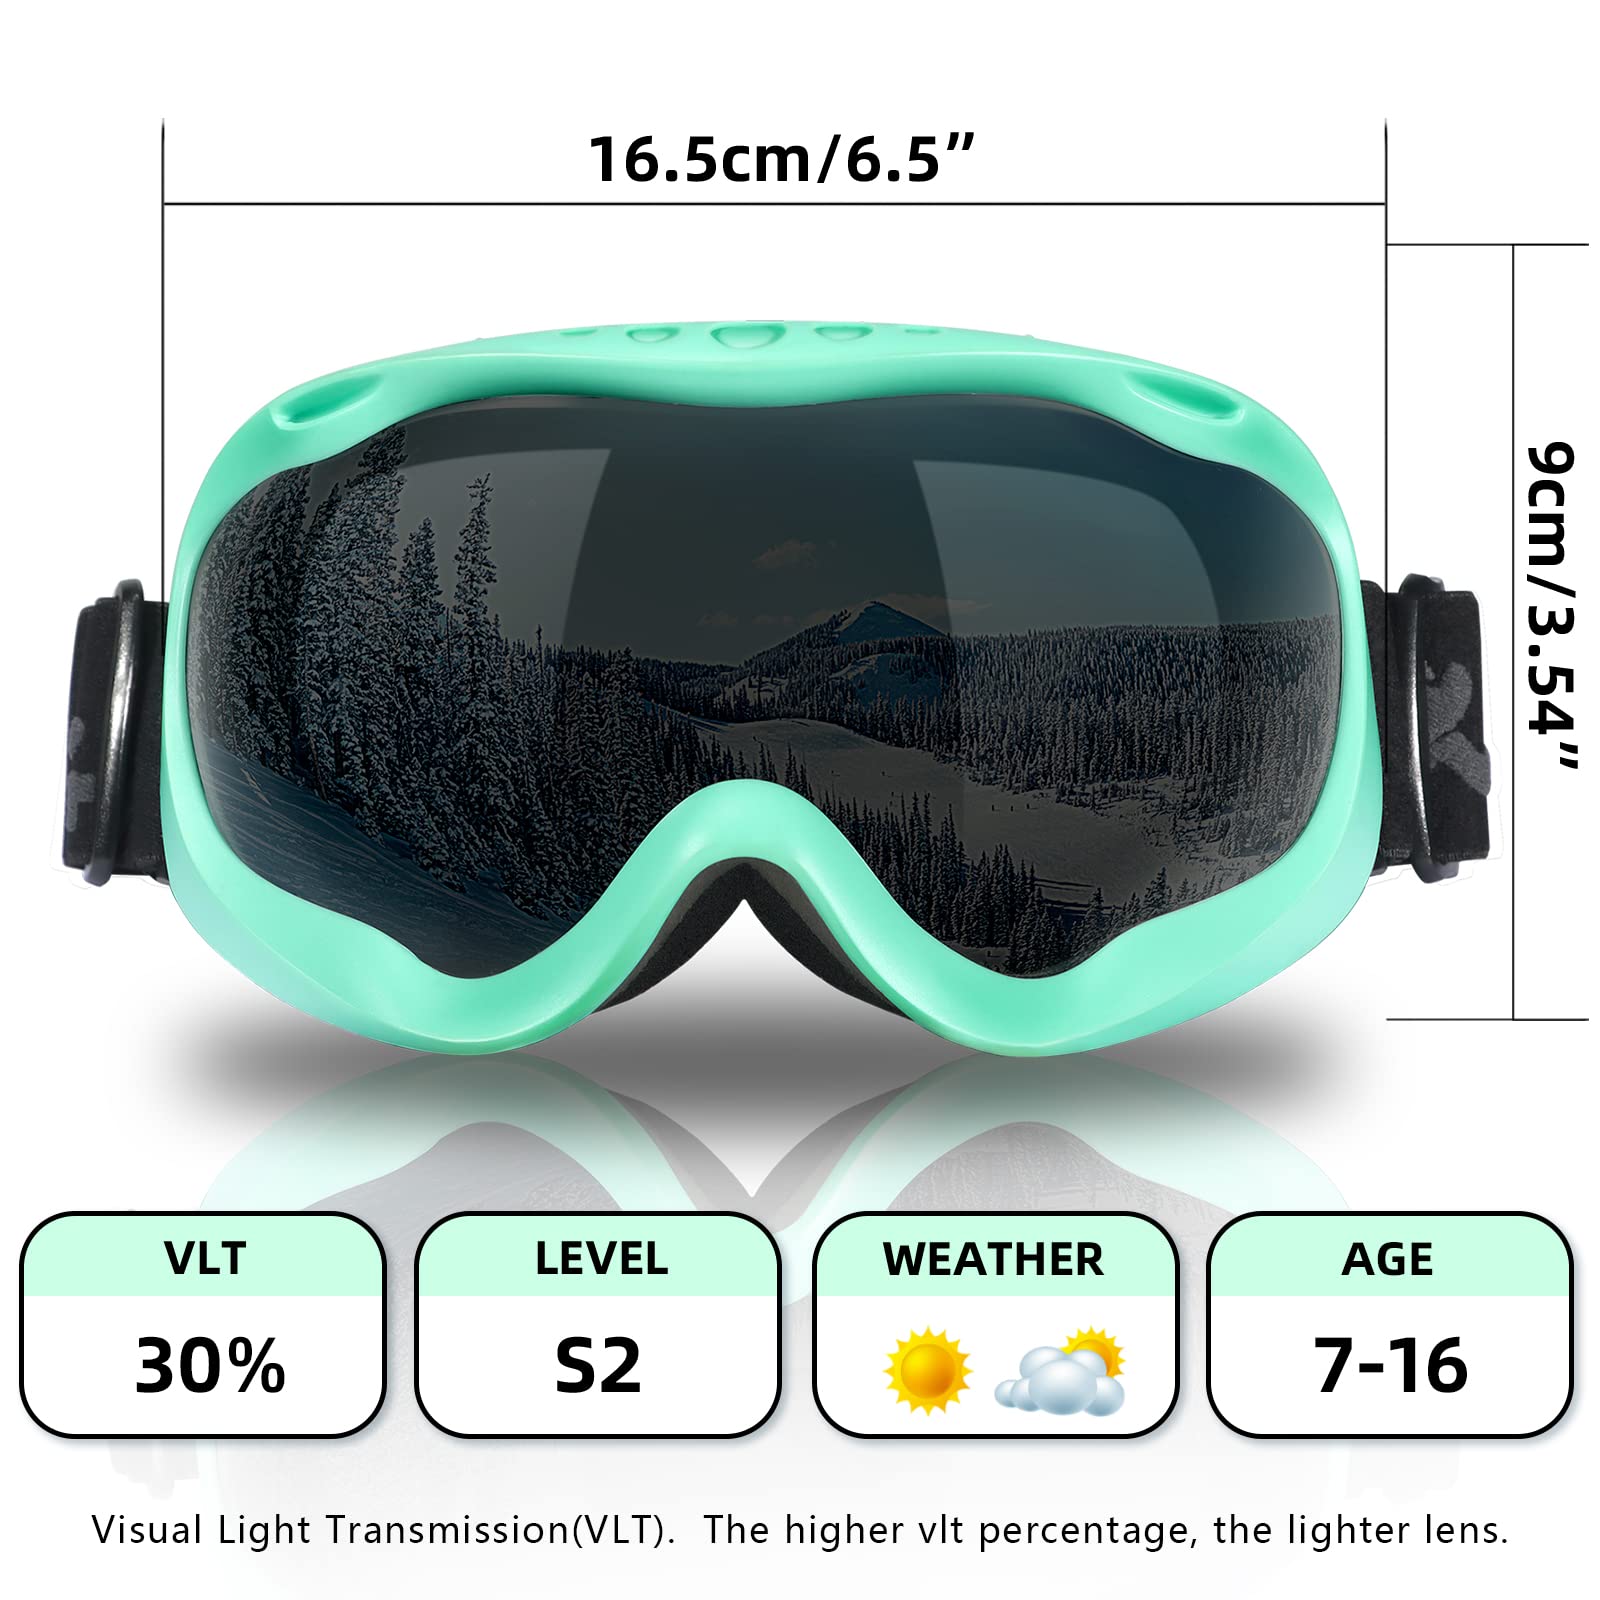 Keary Youth Women Ski Goggles Snowboard Goggles, Anti Fog Skiing Snow Goggles for Boy Girls Kids, UV Protection Snowboarding Goggles Over Glasses Helmet Compatible, Winter Sport Snowmobile Goggles OTG